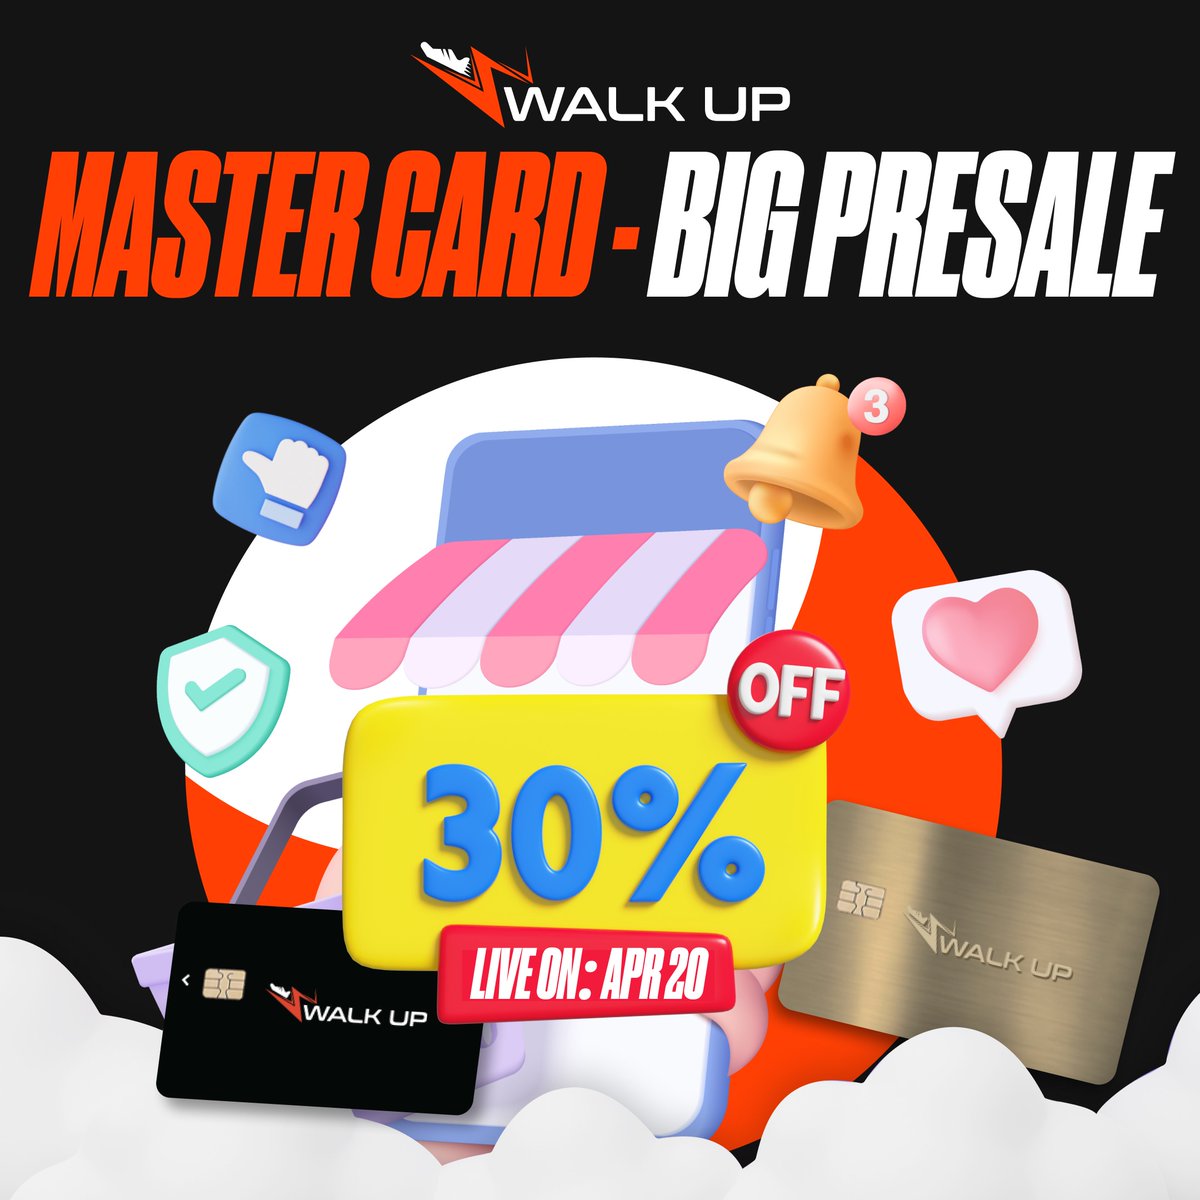 🎉Walk Up MasterCard - Big Presale Alert!  🚀

🍻We know you've been eagerly awaiting the chance to hold this extraordinary card.

The highly anticipated Mastercard pre-sale is almost here! 🎉 

⌚Save the date: April 20th.

🐦 Don't miss your chance to snatch up jaw-dropping…